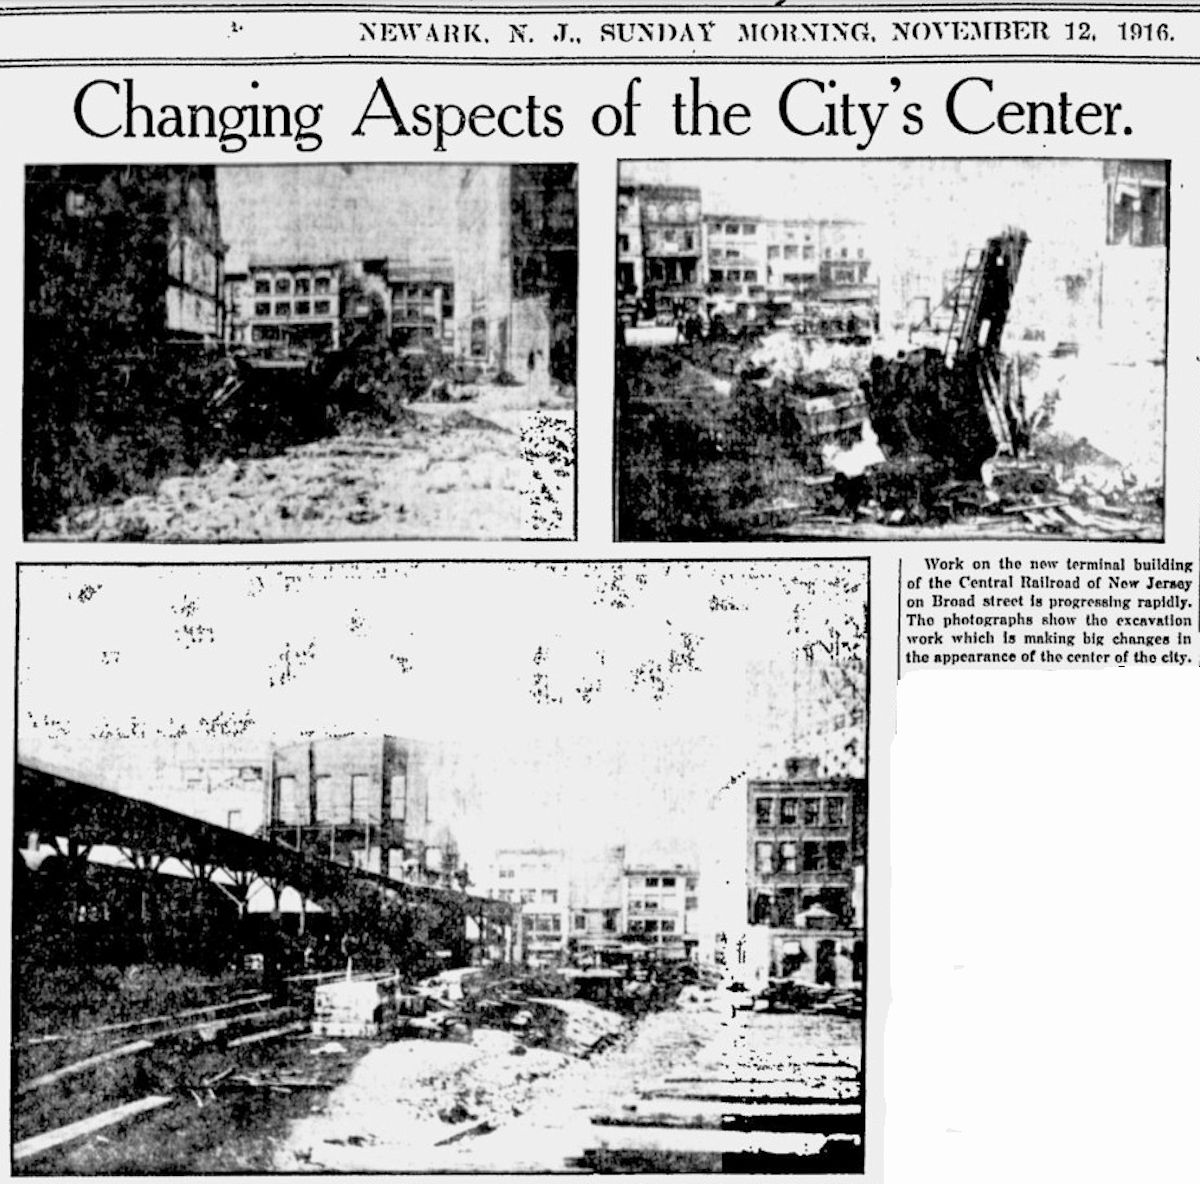 Changing Aspects of the City's Center
1916
